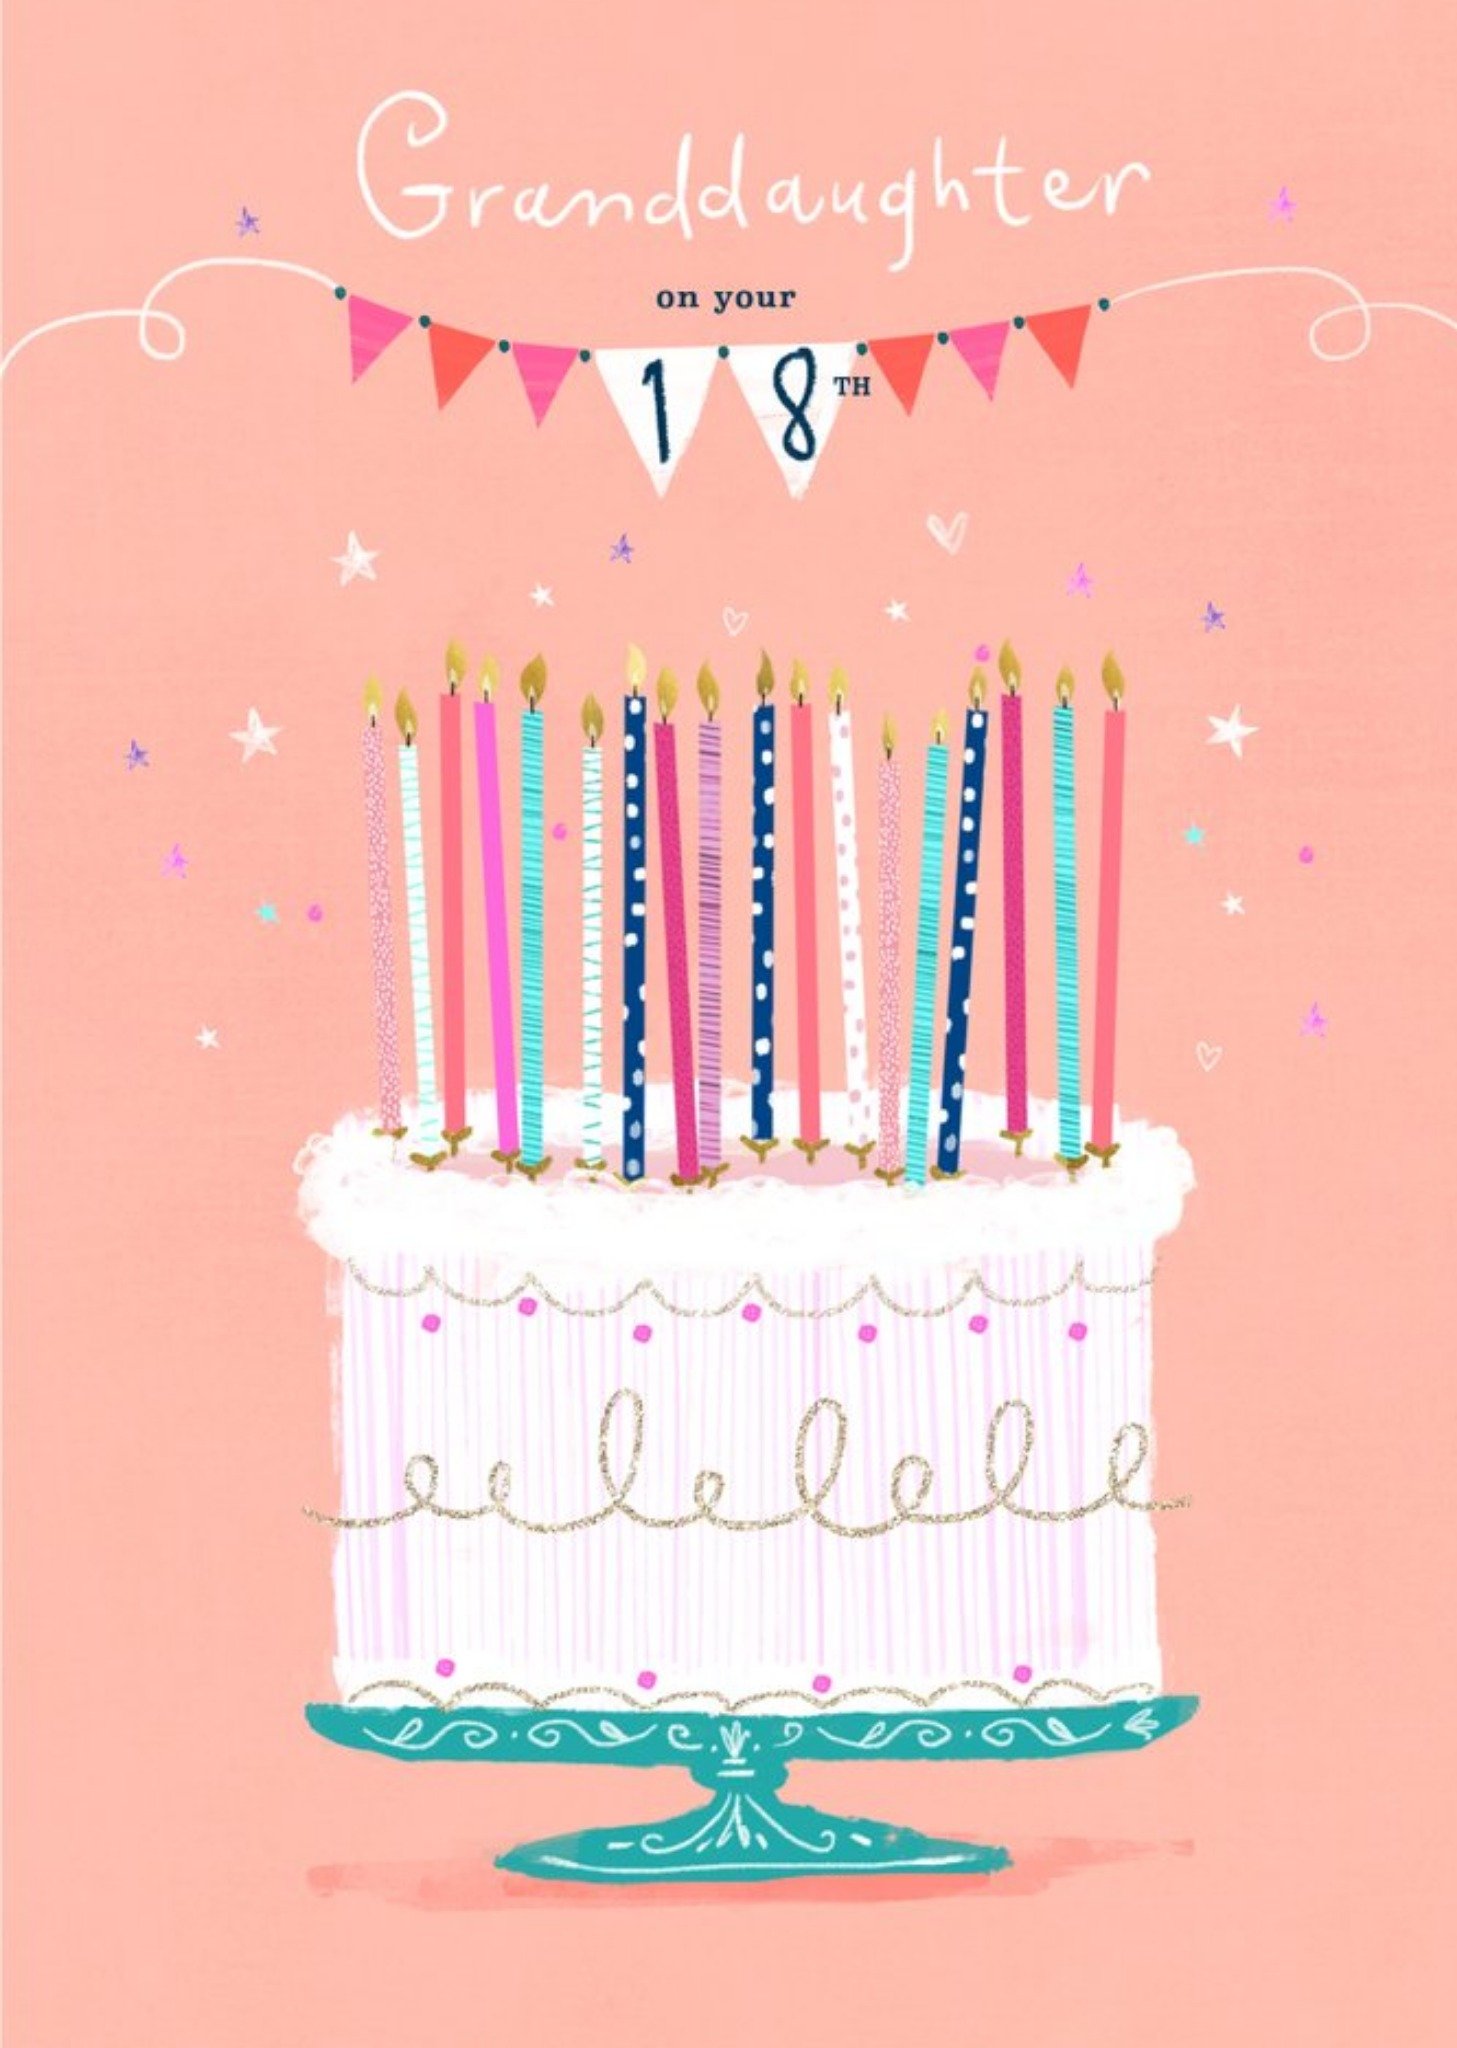 Moonpig Cute Illustration Cake With Candles Granddaughter On Your 18th Birthday Card, Large